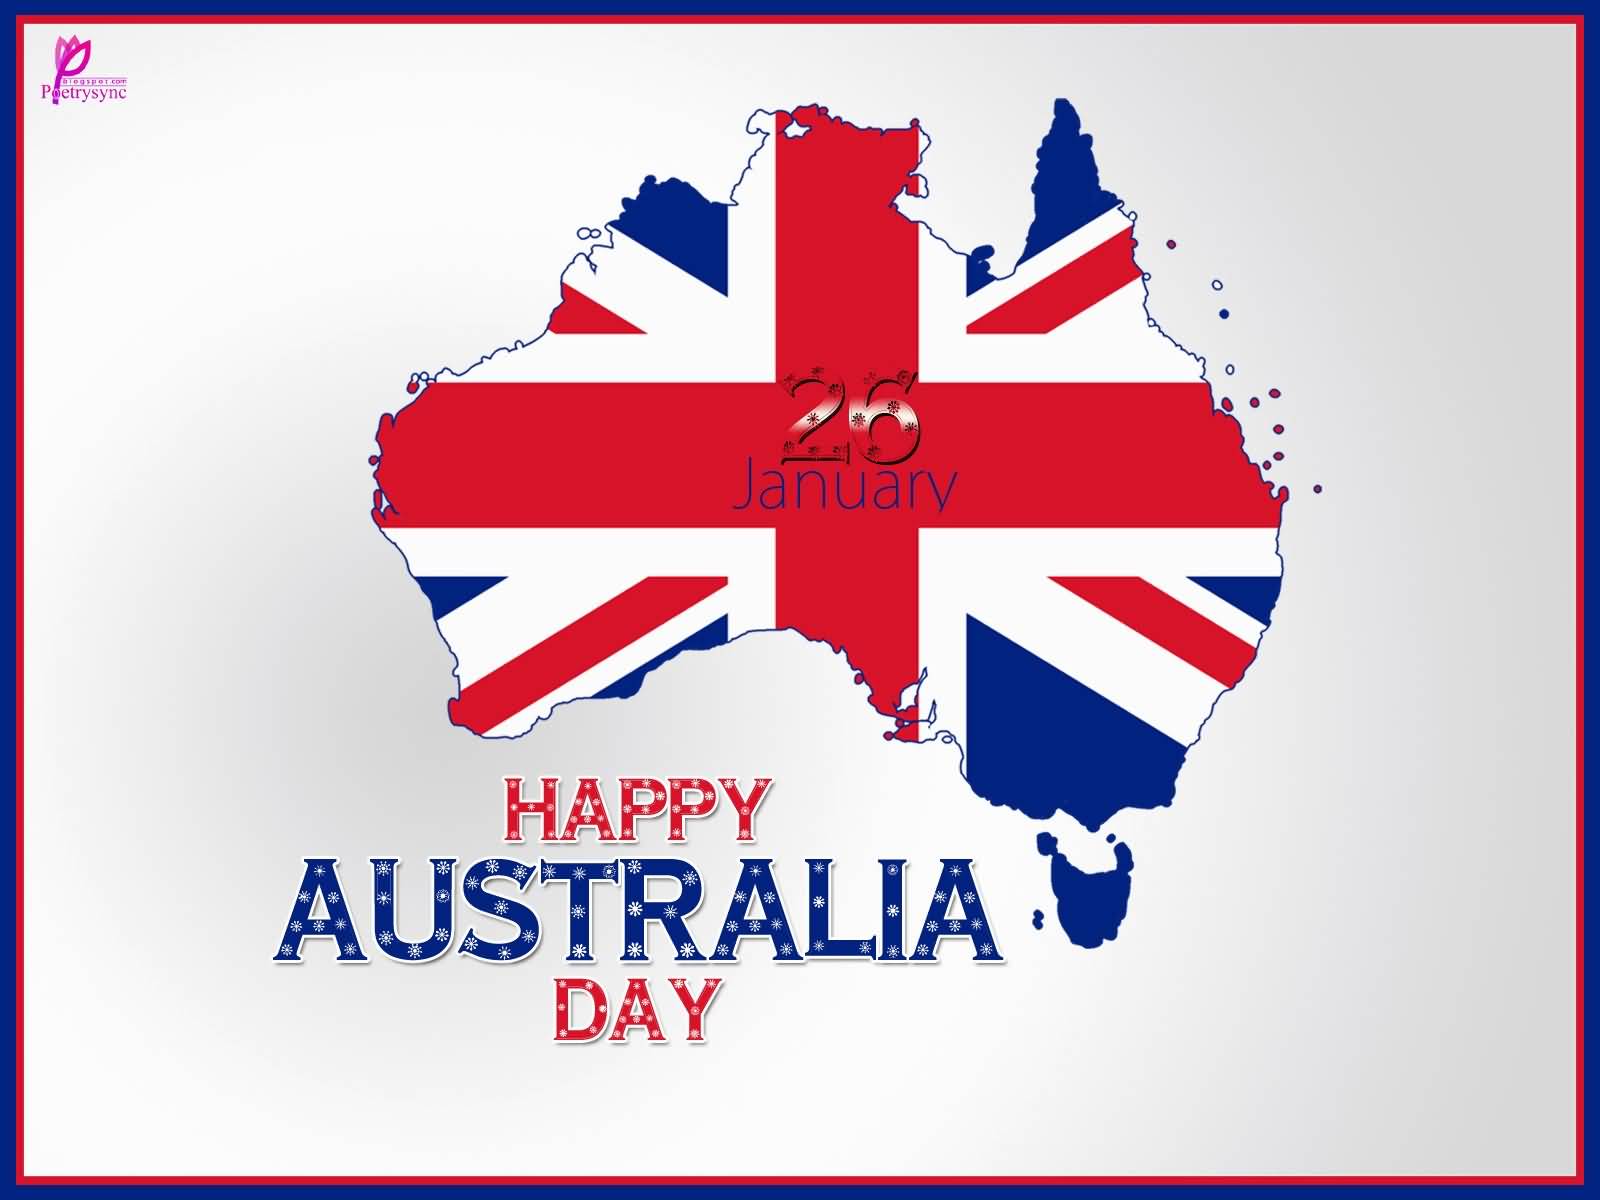 50 Best Australia Day 2017 Wish Pictures And Photos